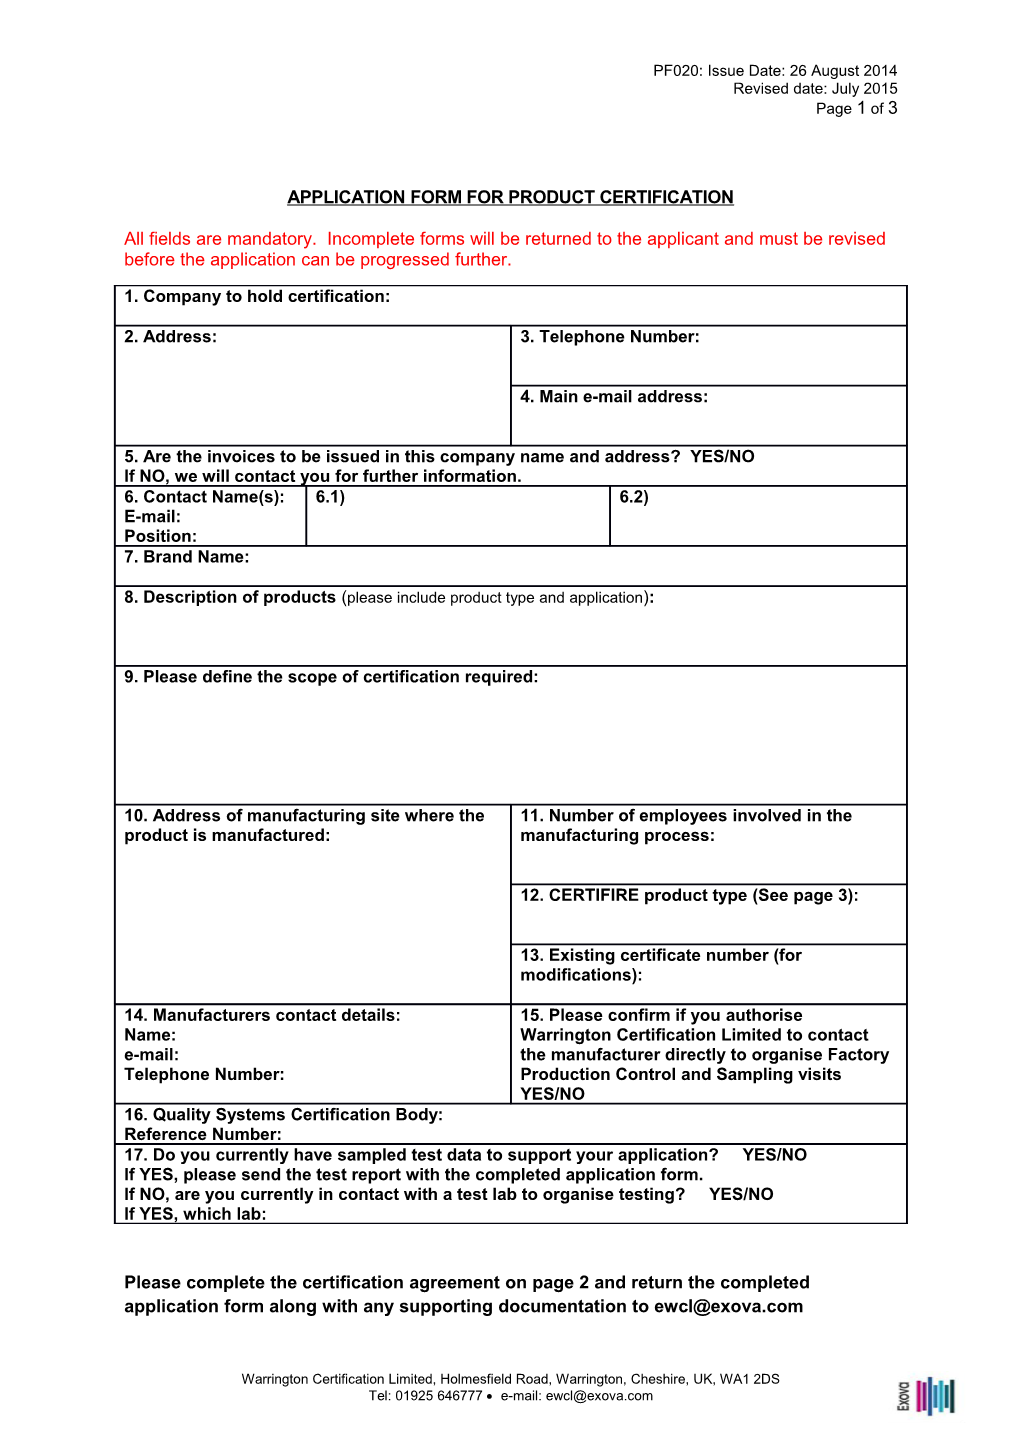 Application Form for Product Certification